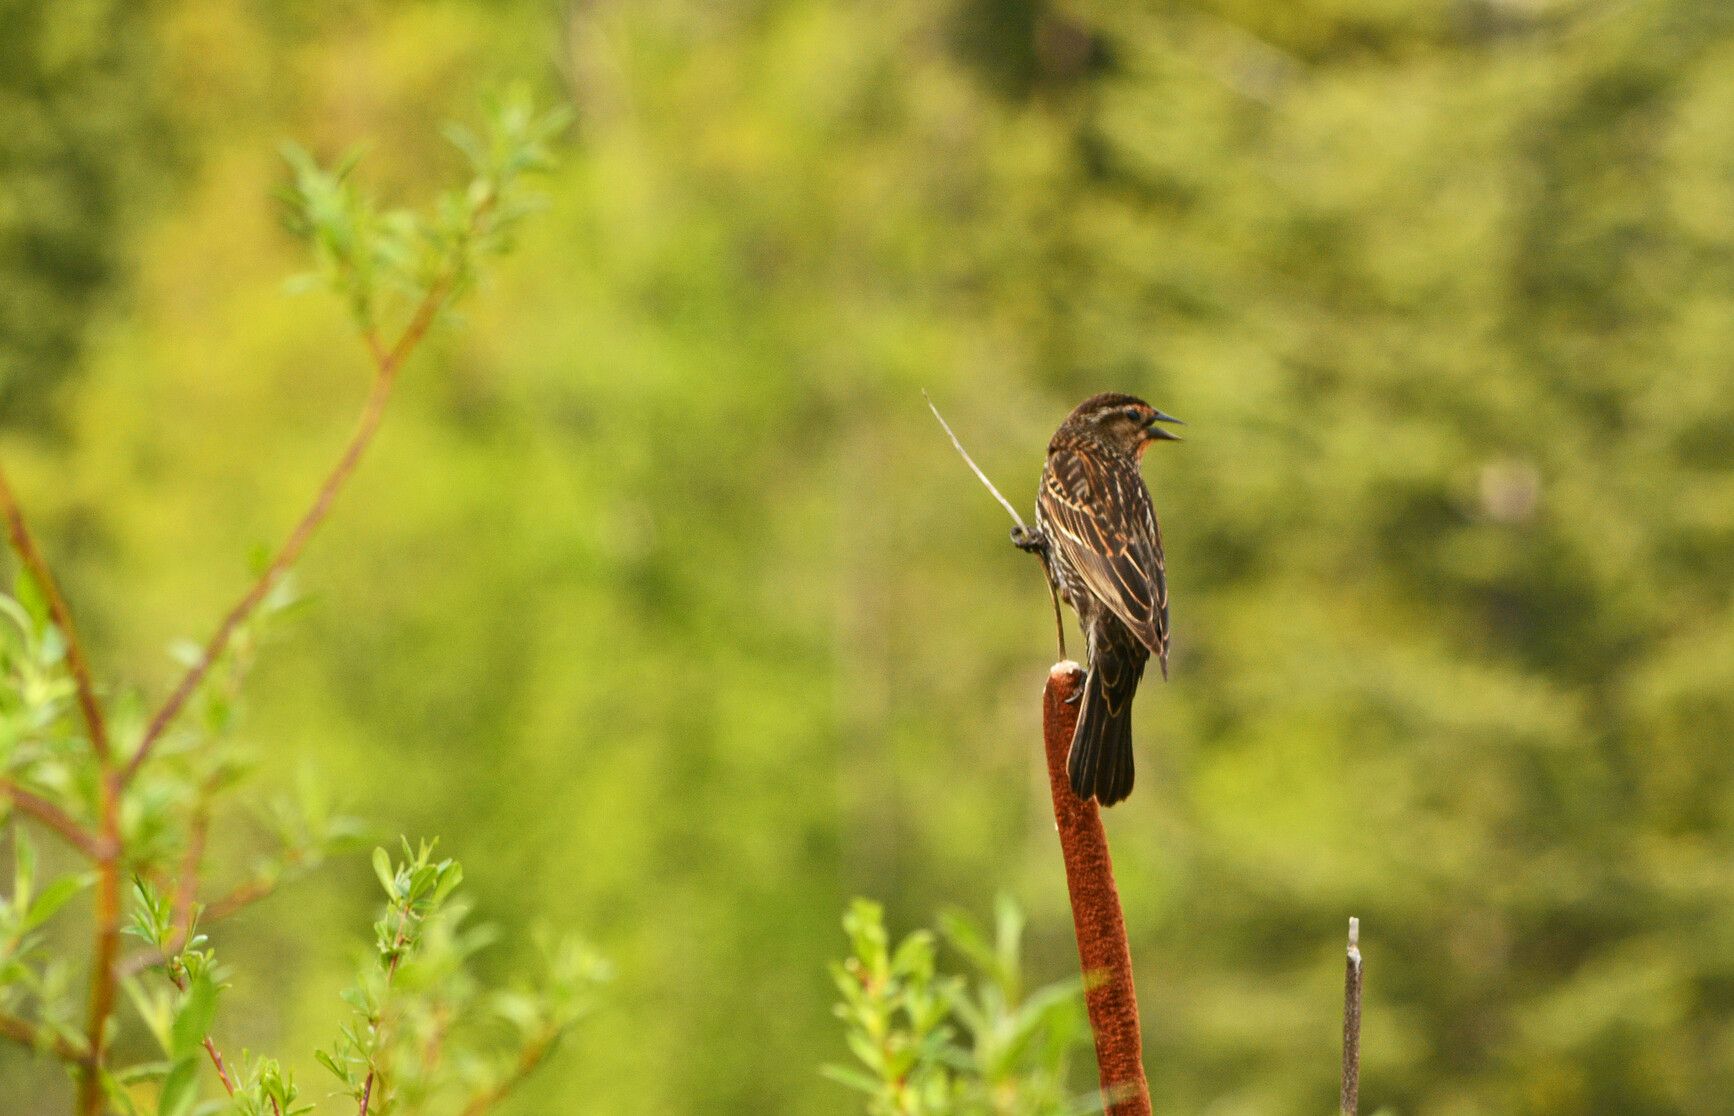 Meet the stunning female red-winged blackbird. Found at Jewel Lake Park, she's easily recognized by her crisply streaked dark brown feathers, with a paler breast and often a charming whitish eyebrow.